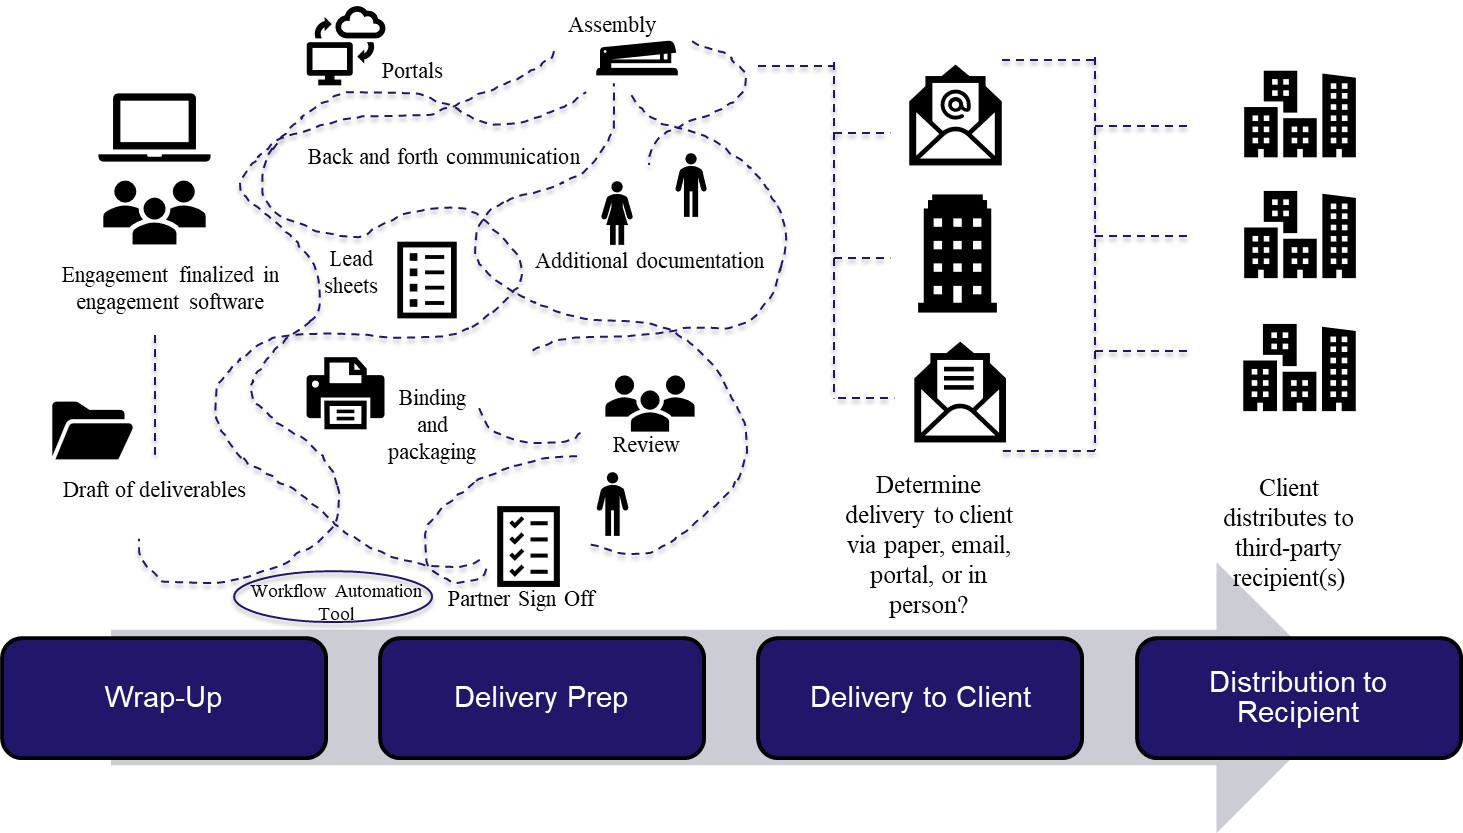 Figure 1 Wrap-up to Delivery to Distribution